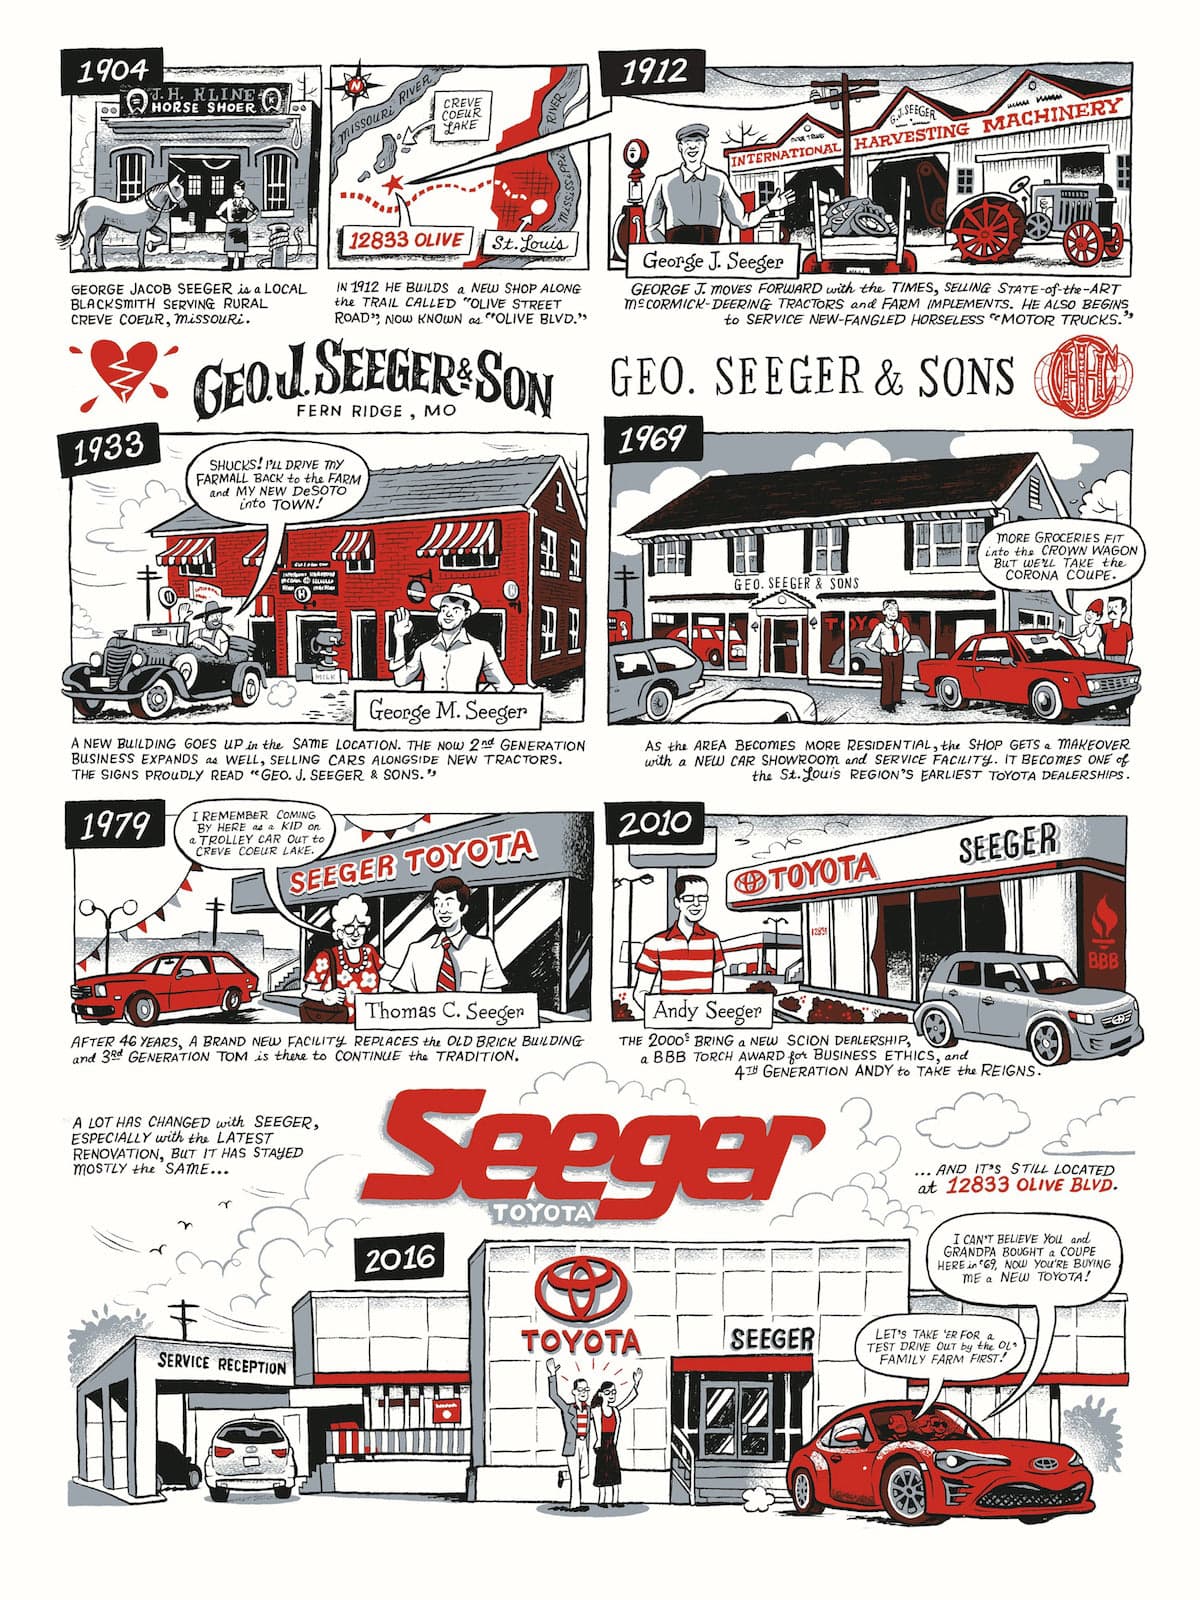 A history of Seeger Toyota in St. Louis, MO